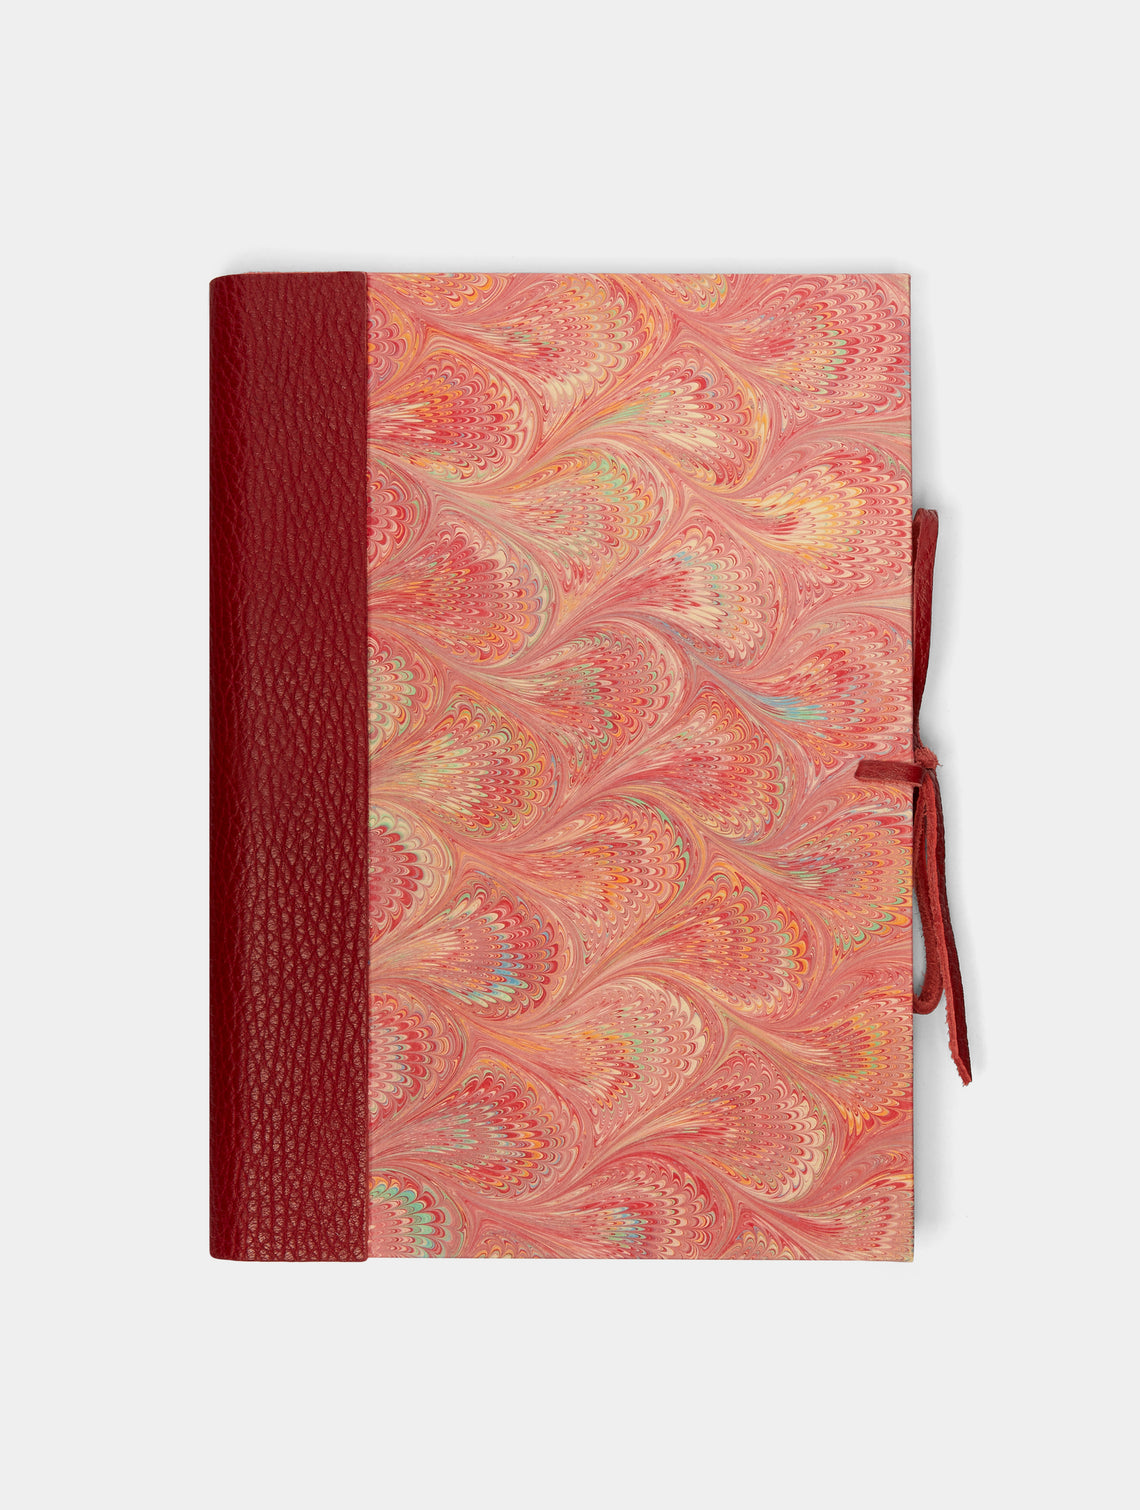 Giannini Firenze - Hand Marbled Leather Bound Notebook - Red - ABASK - 